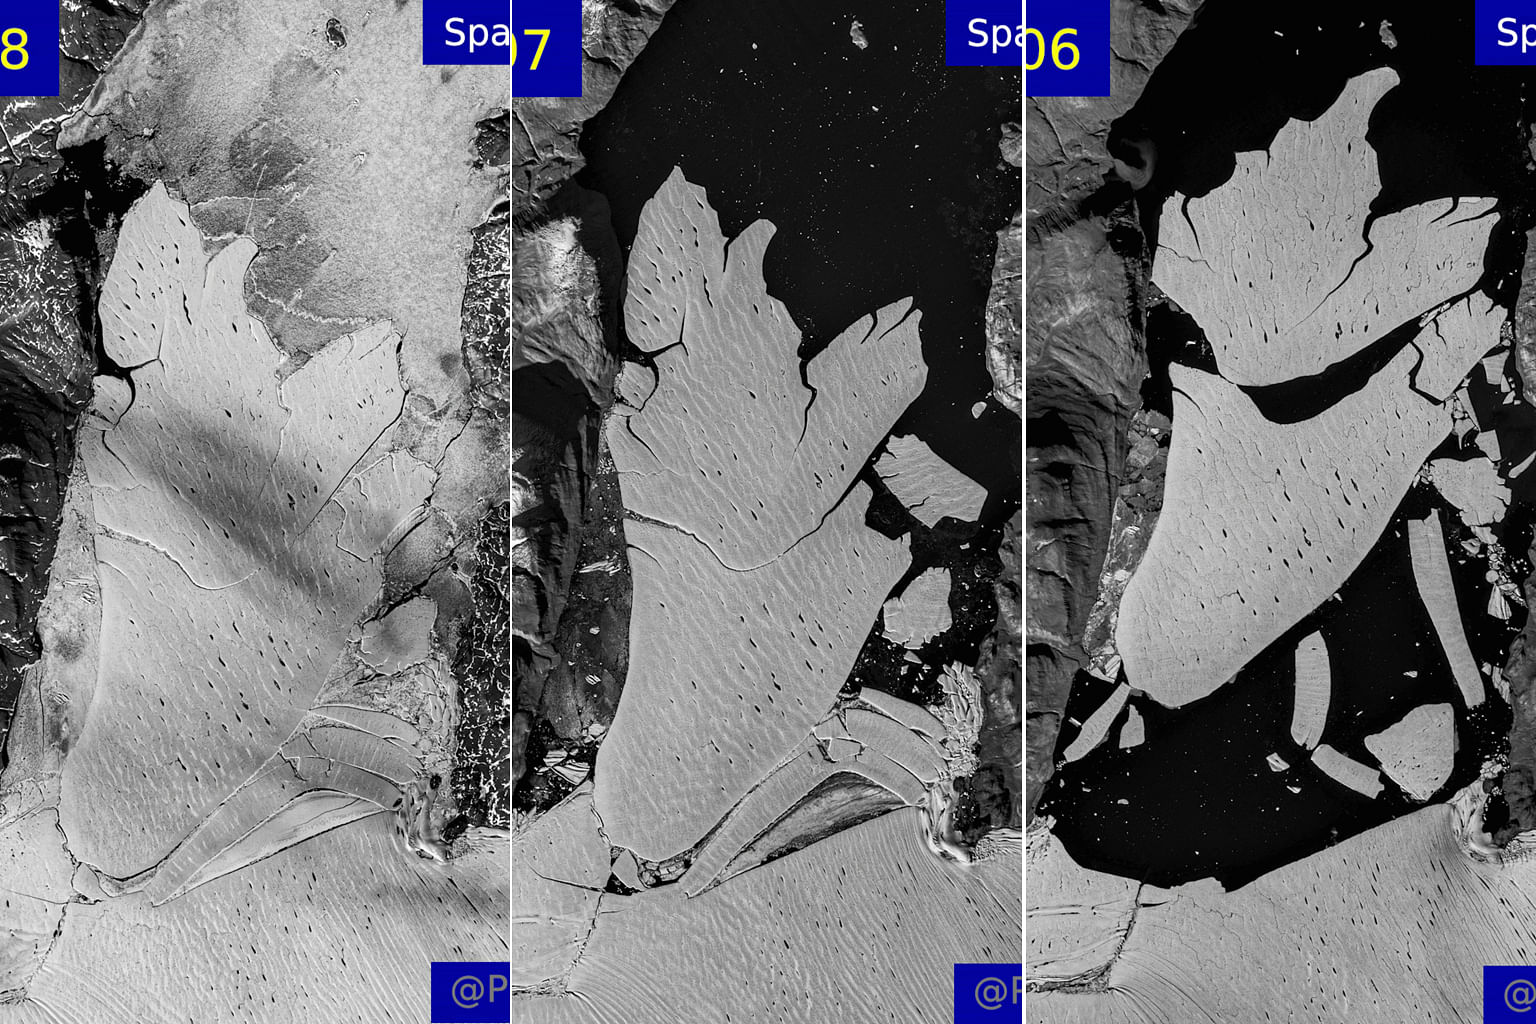 As the summer melt season reaches its peak, the largest Arctic ice shelf in Greenland has jettisoned a massive 113 sq km chunk of ice that is larger than Paris. The three satellite images here show the Spalte Glacier in August 2018 (far left), Septem